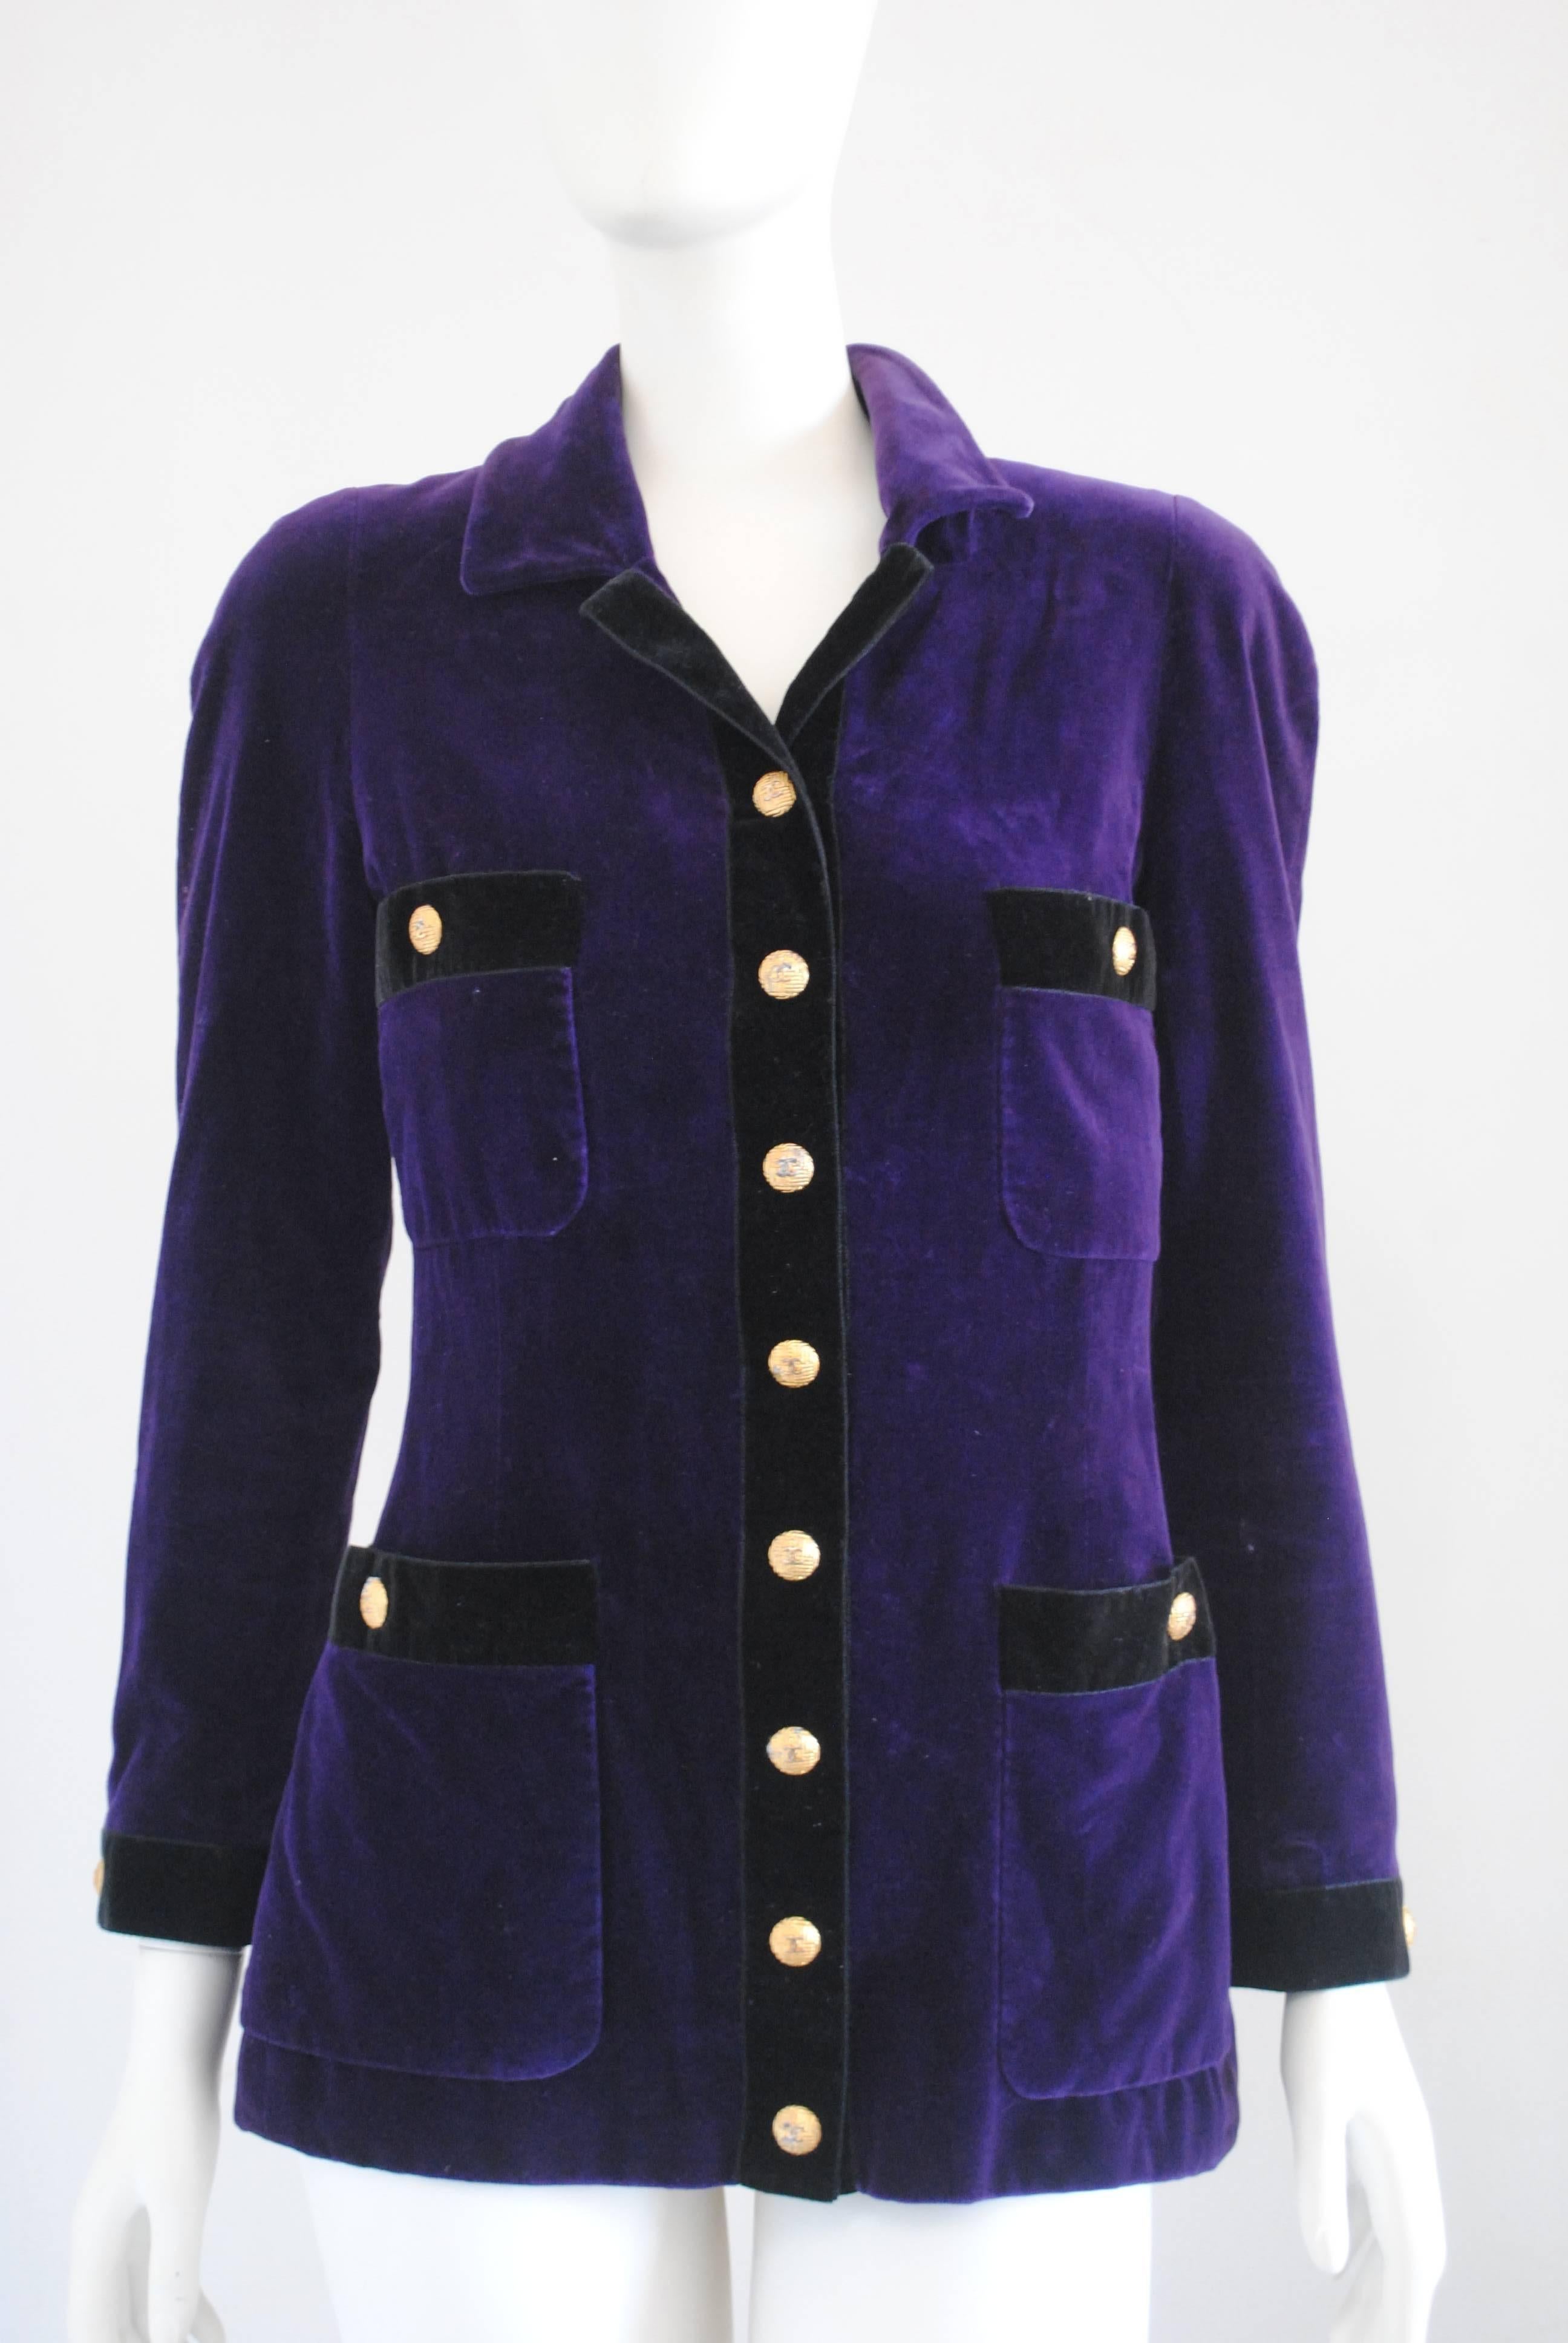 1980s Chanel Boutique Purple Black Velvet Jacket
Purple black jacket embellished with gold tone bottons 
2 tasks on the front
Please note that vintage items can have imperfections due to age and wear
Totally made in France in french size 38 which